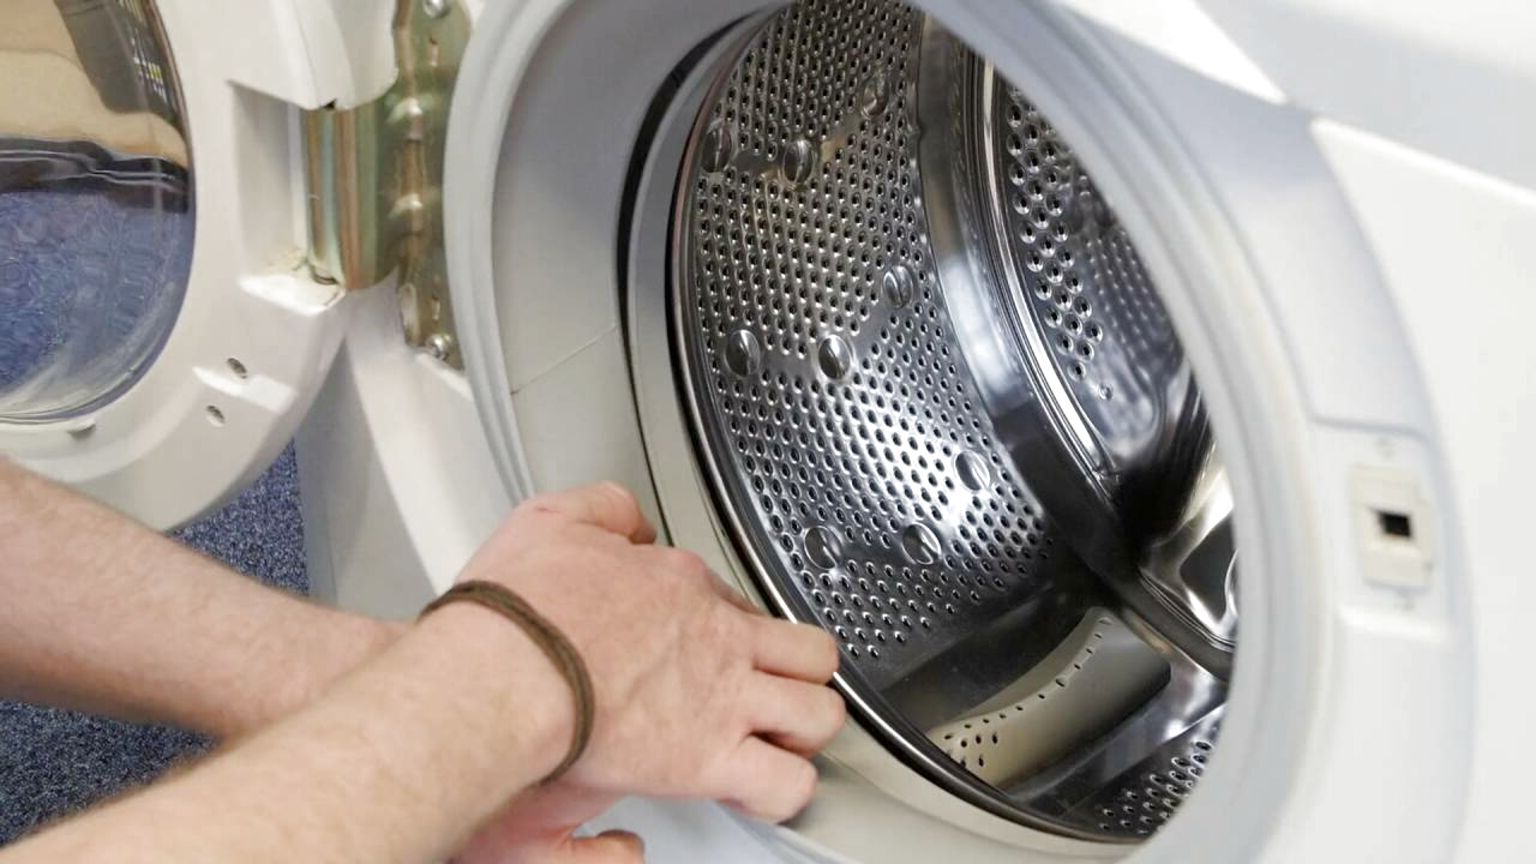 How To Fix A Loose Drum In A Washing Machine